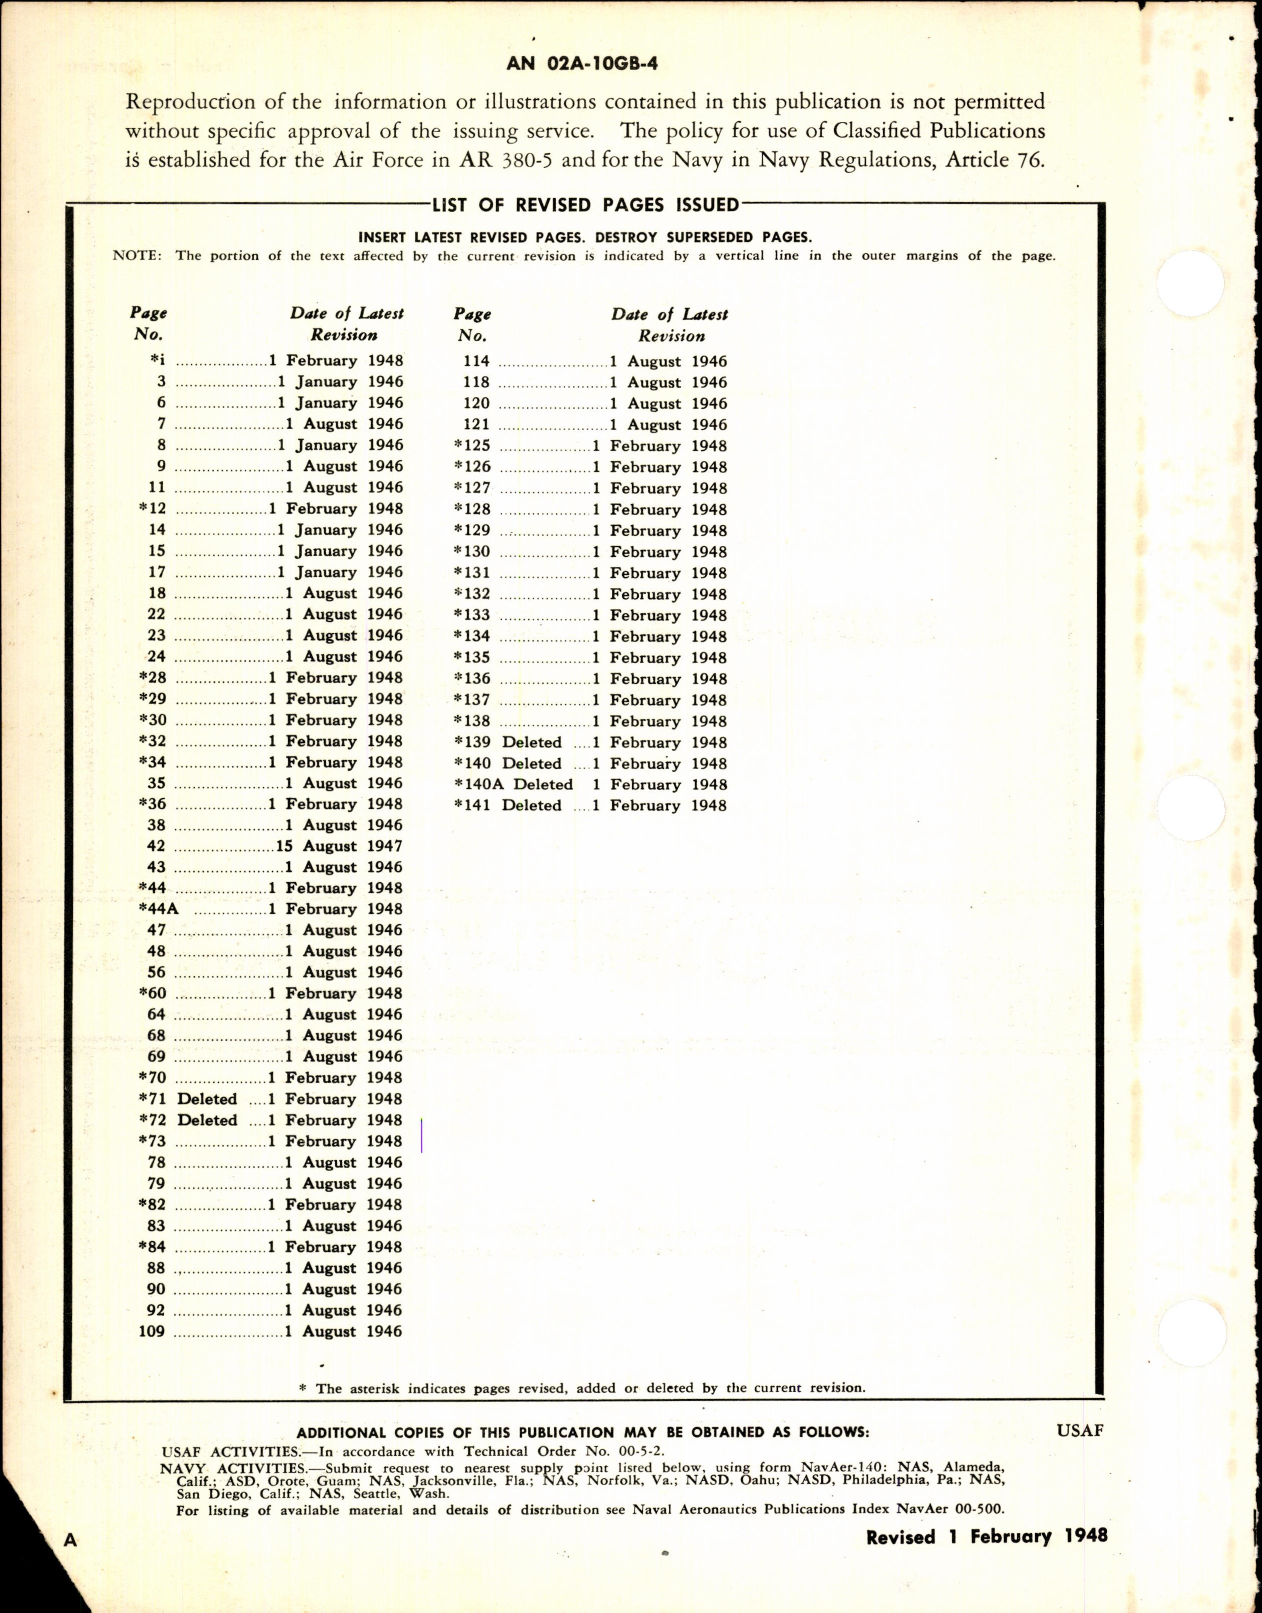 Sample page 2 from AirCorps Library document: Parts Catalog for R-2800-8, -8W, -10, -10W, and -65 Engines